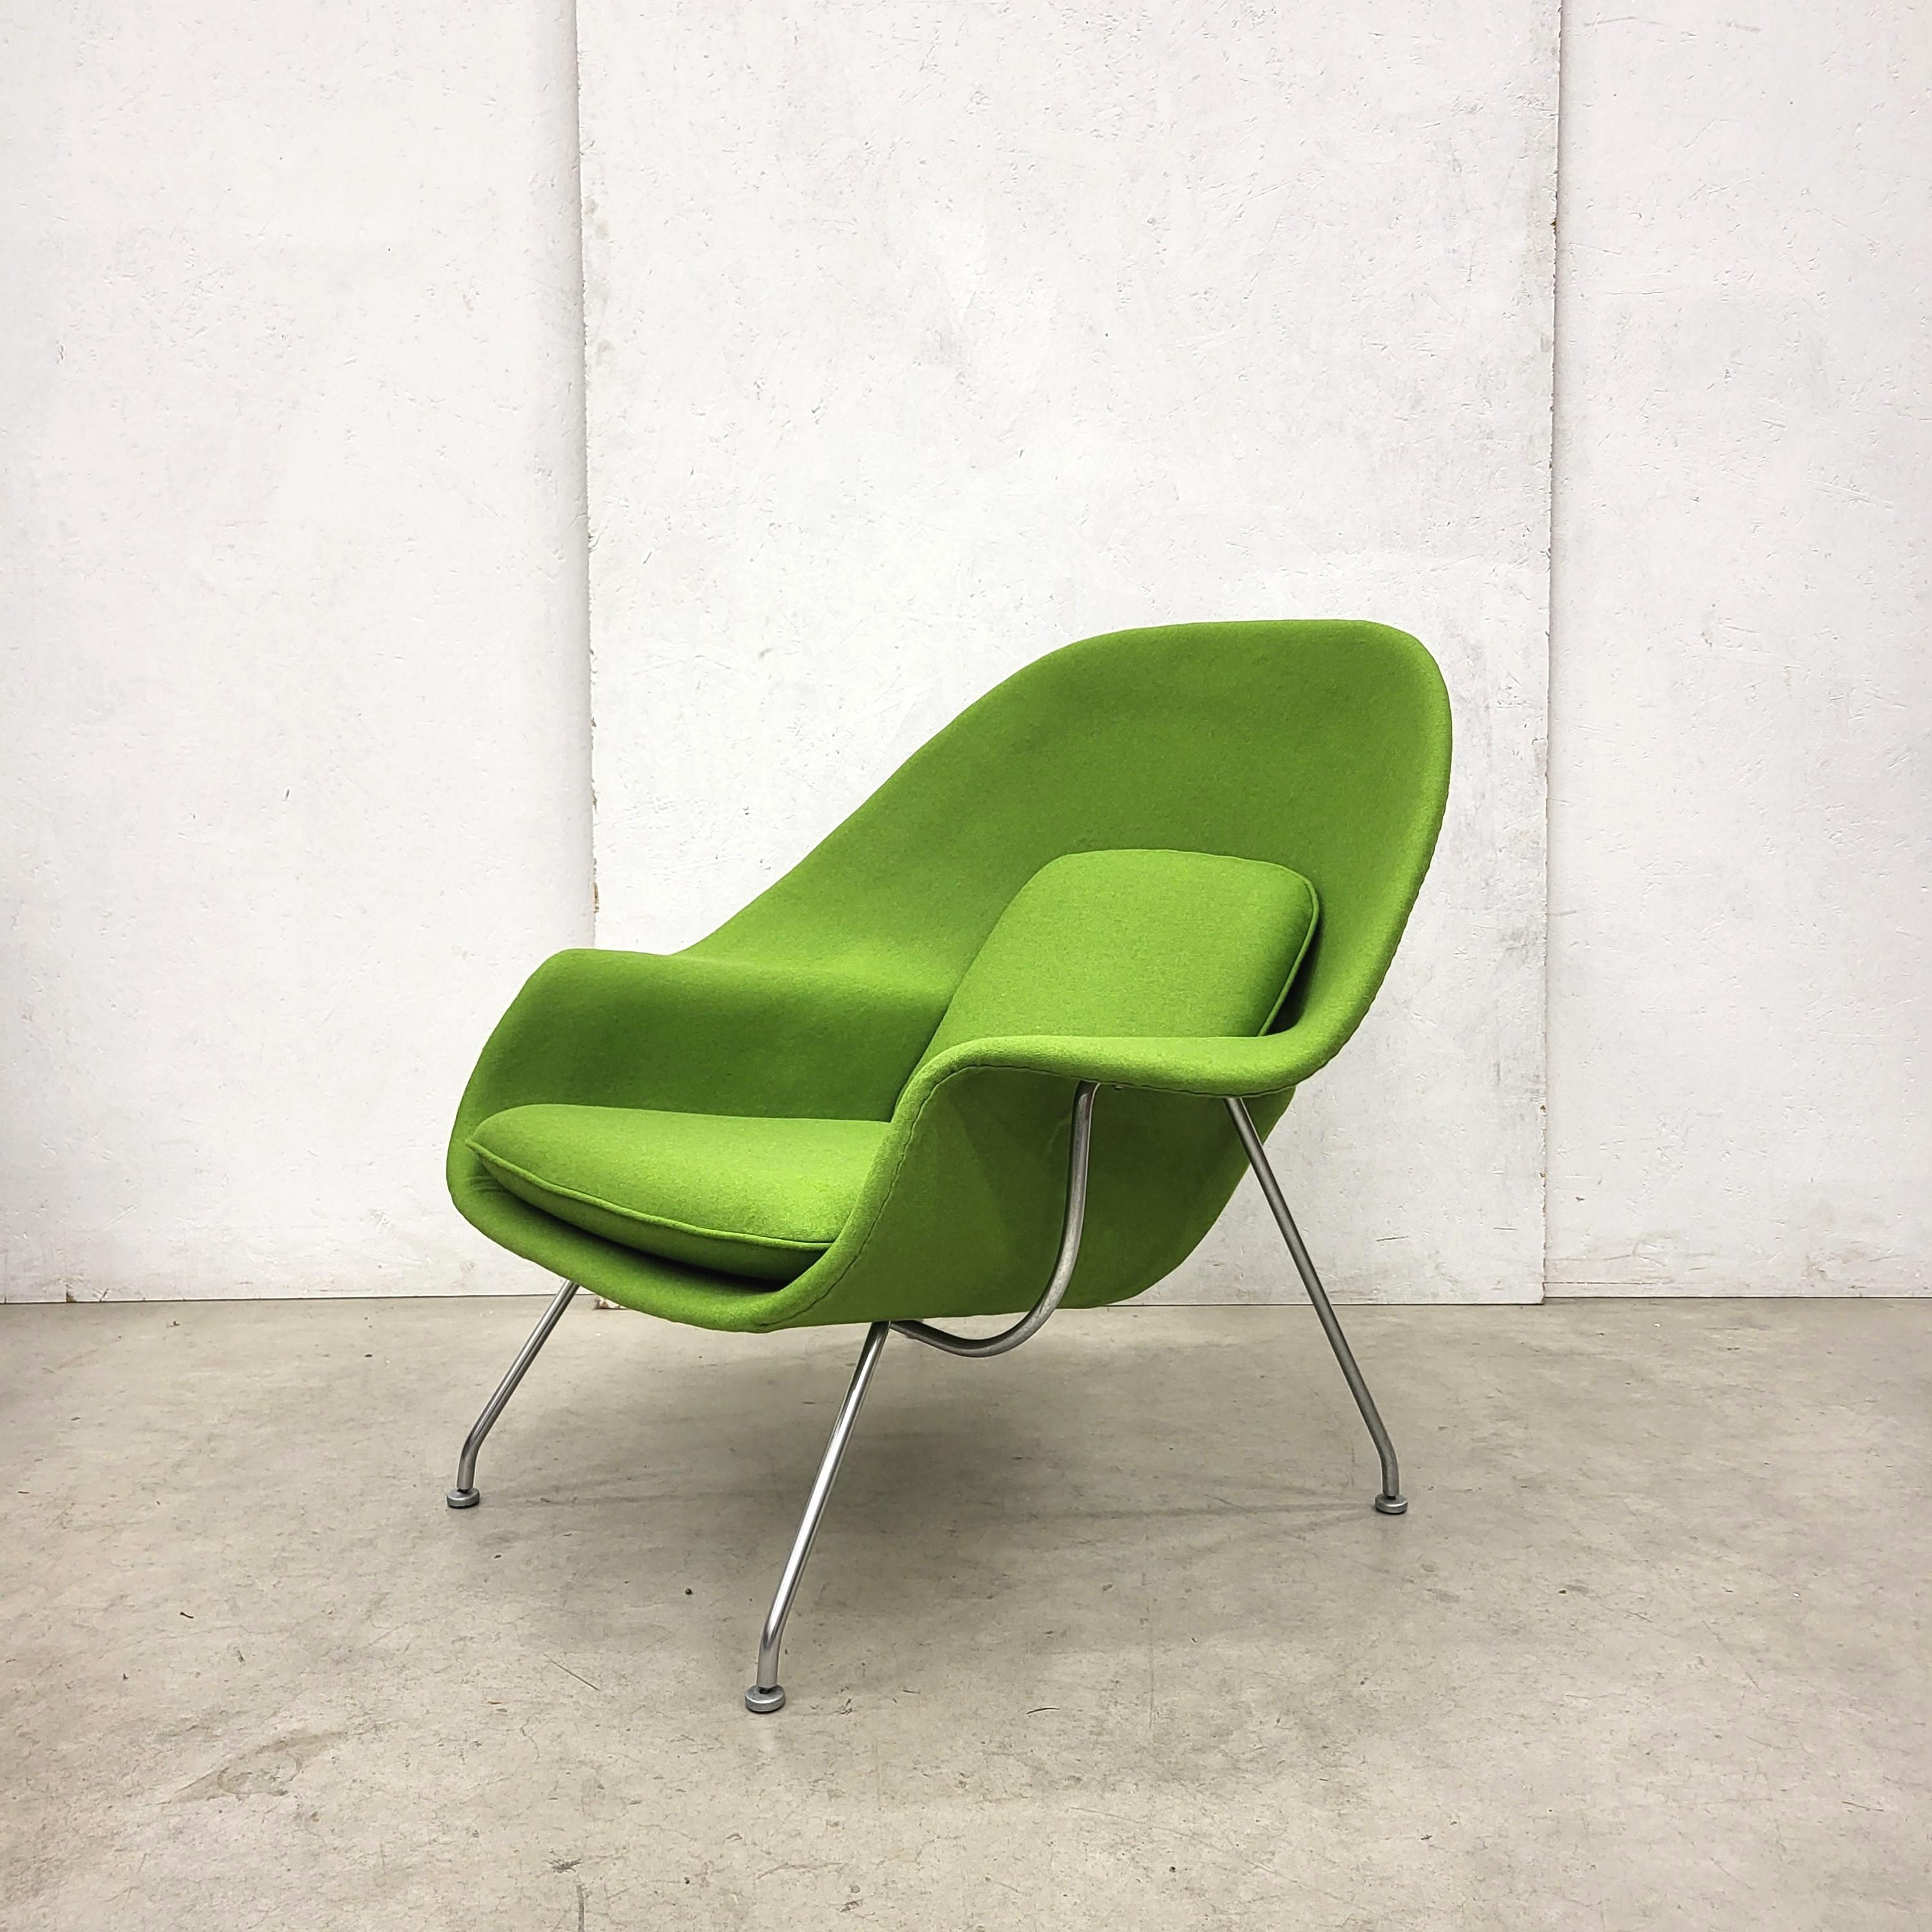 Hand-Crafted Woodgreen Womb Chair & Ottoman by Eero Saarinen for Knoll, 1960s For Sale